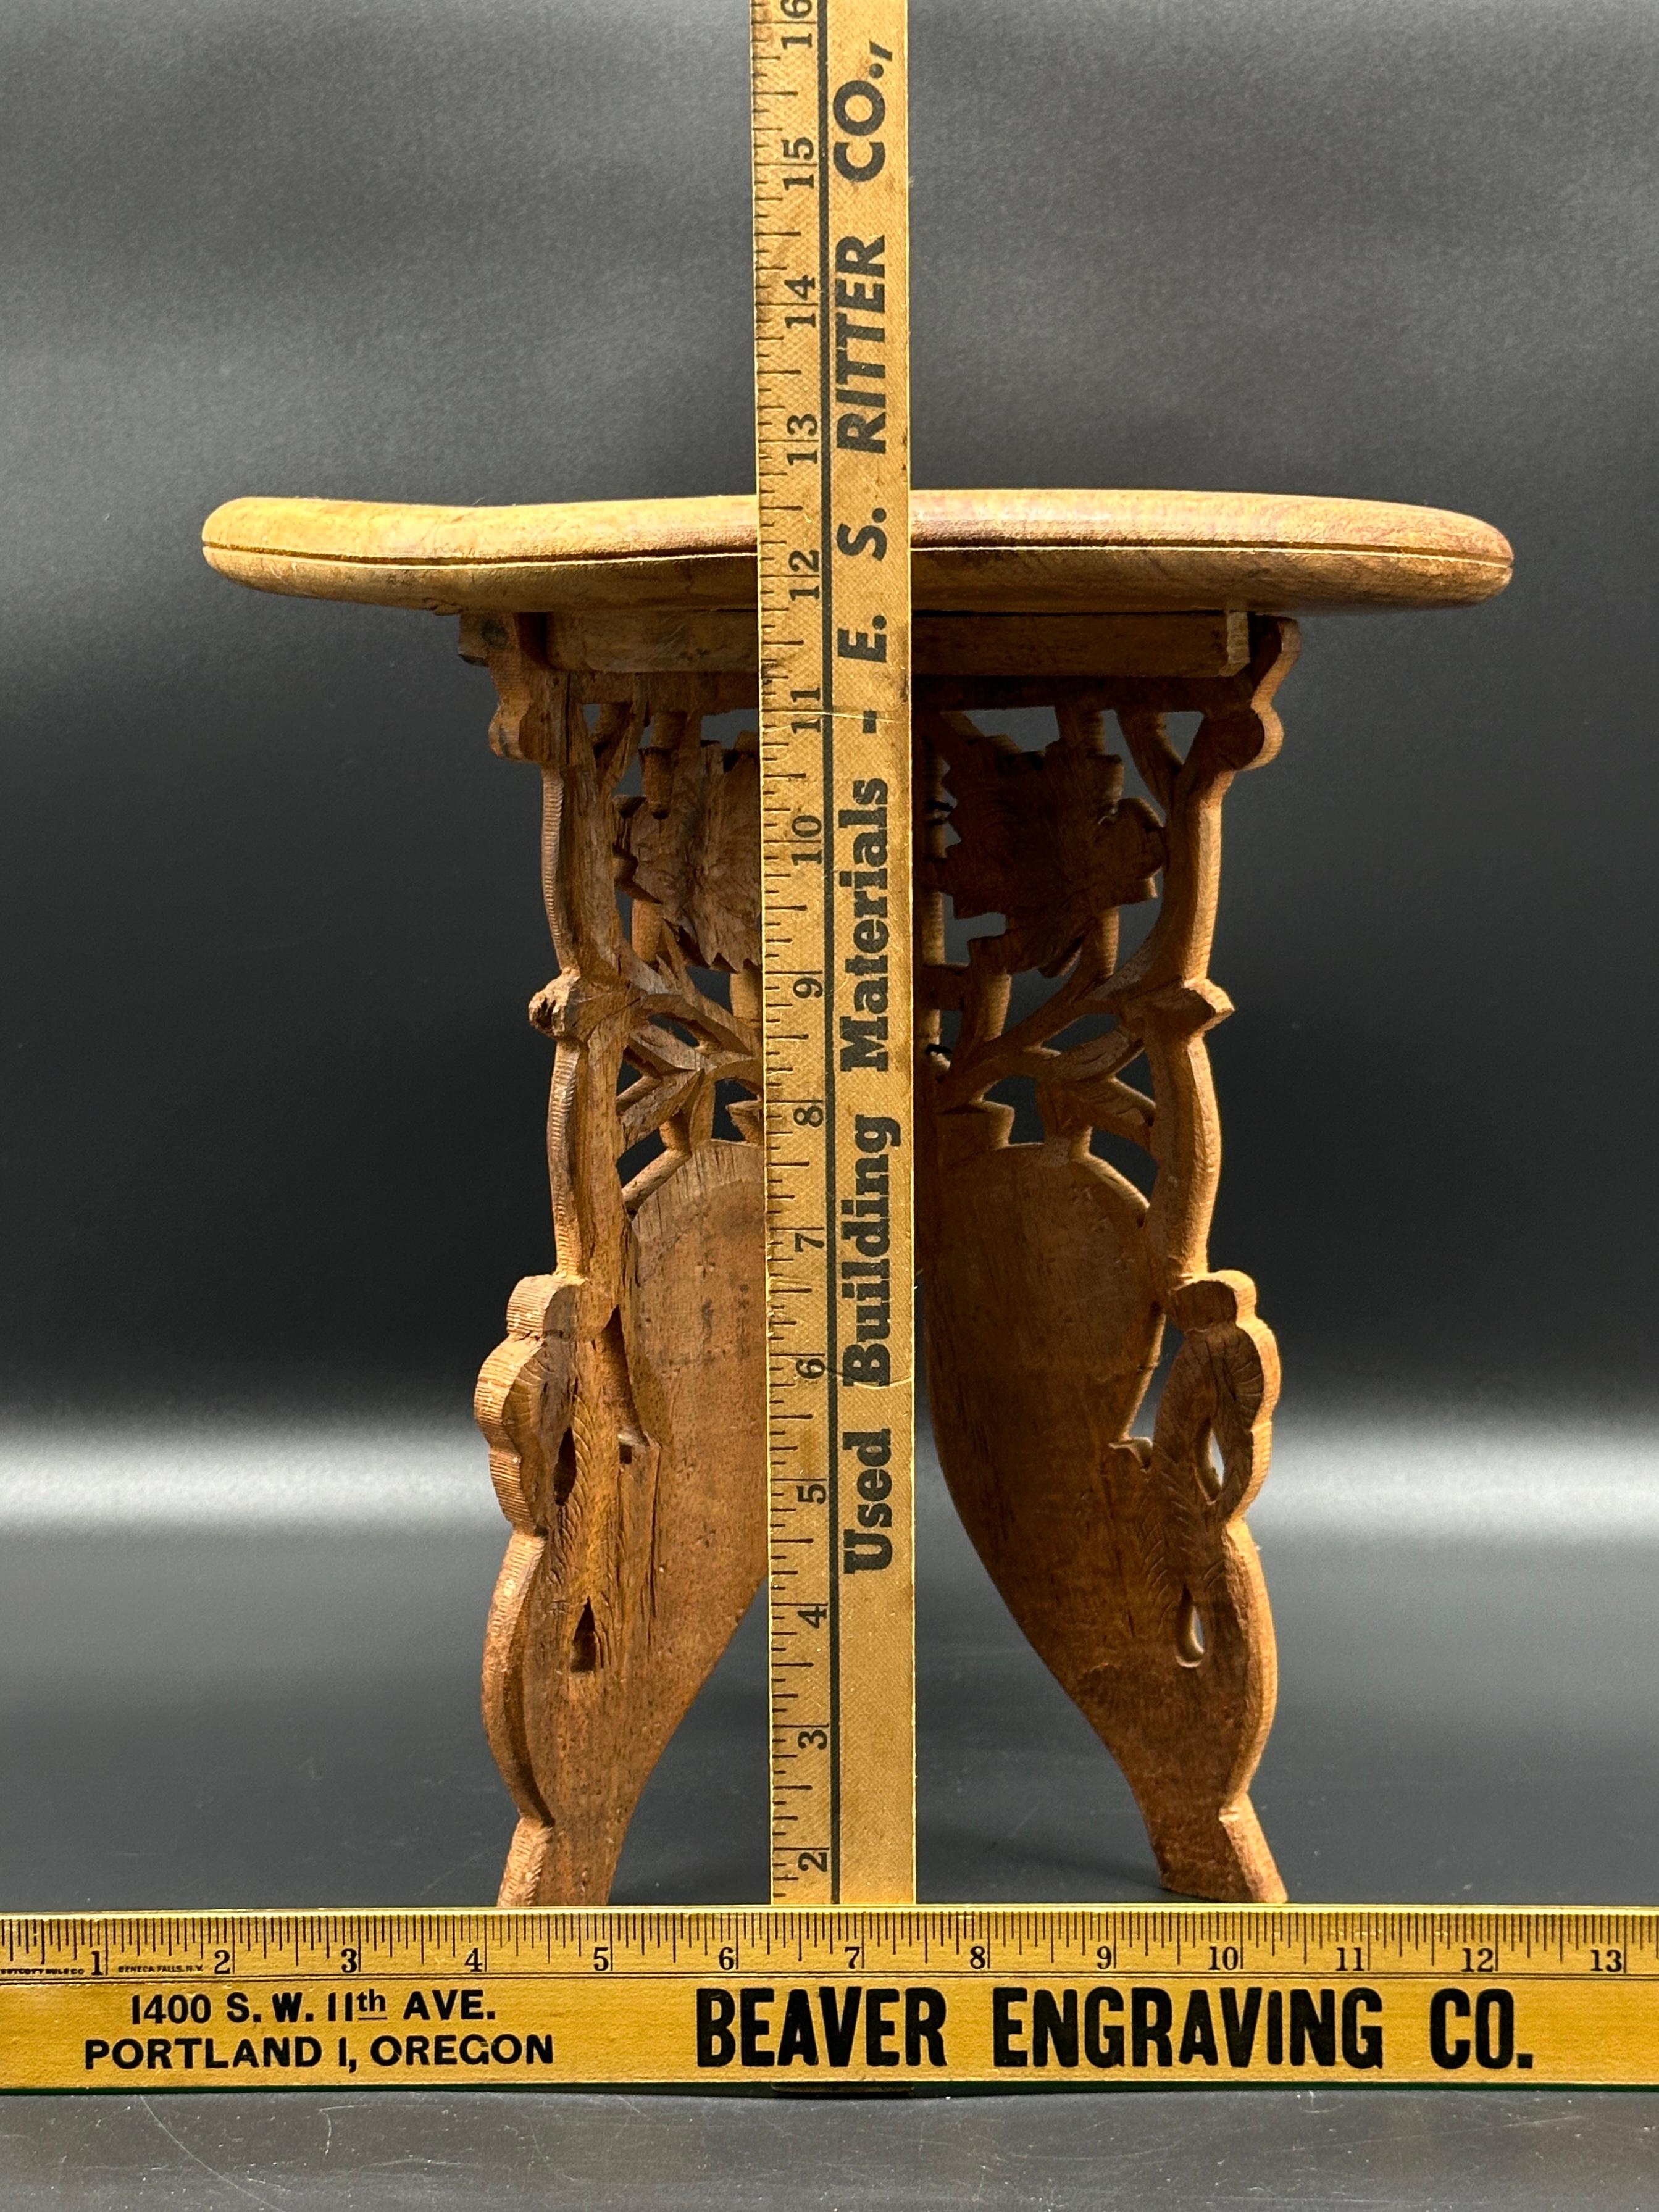 Beautiful Hand Carved Wood Accent Table